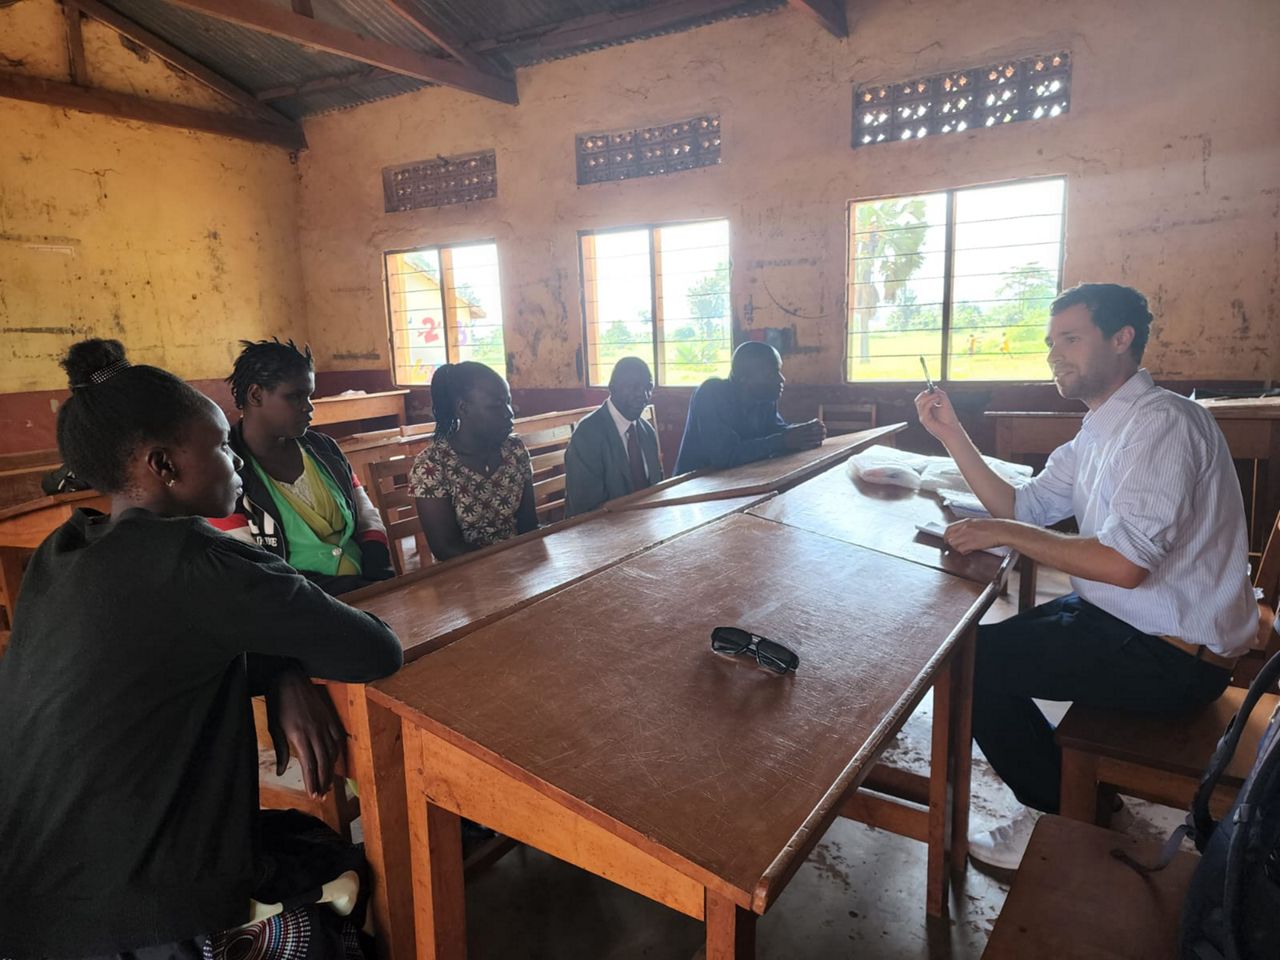 Samuel Foulkes met with teachers and community leaders to discuss needs of visually impaired students in four East African countries. (Photo courtesy of Clovernook Center for the Blind & Visually Impaired)